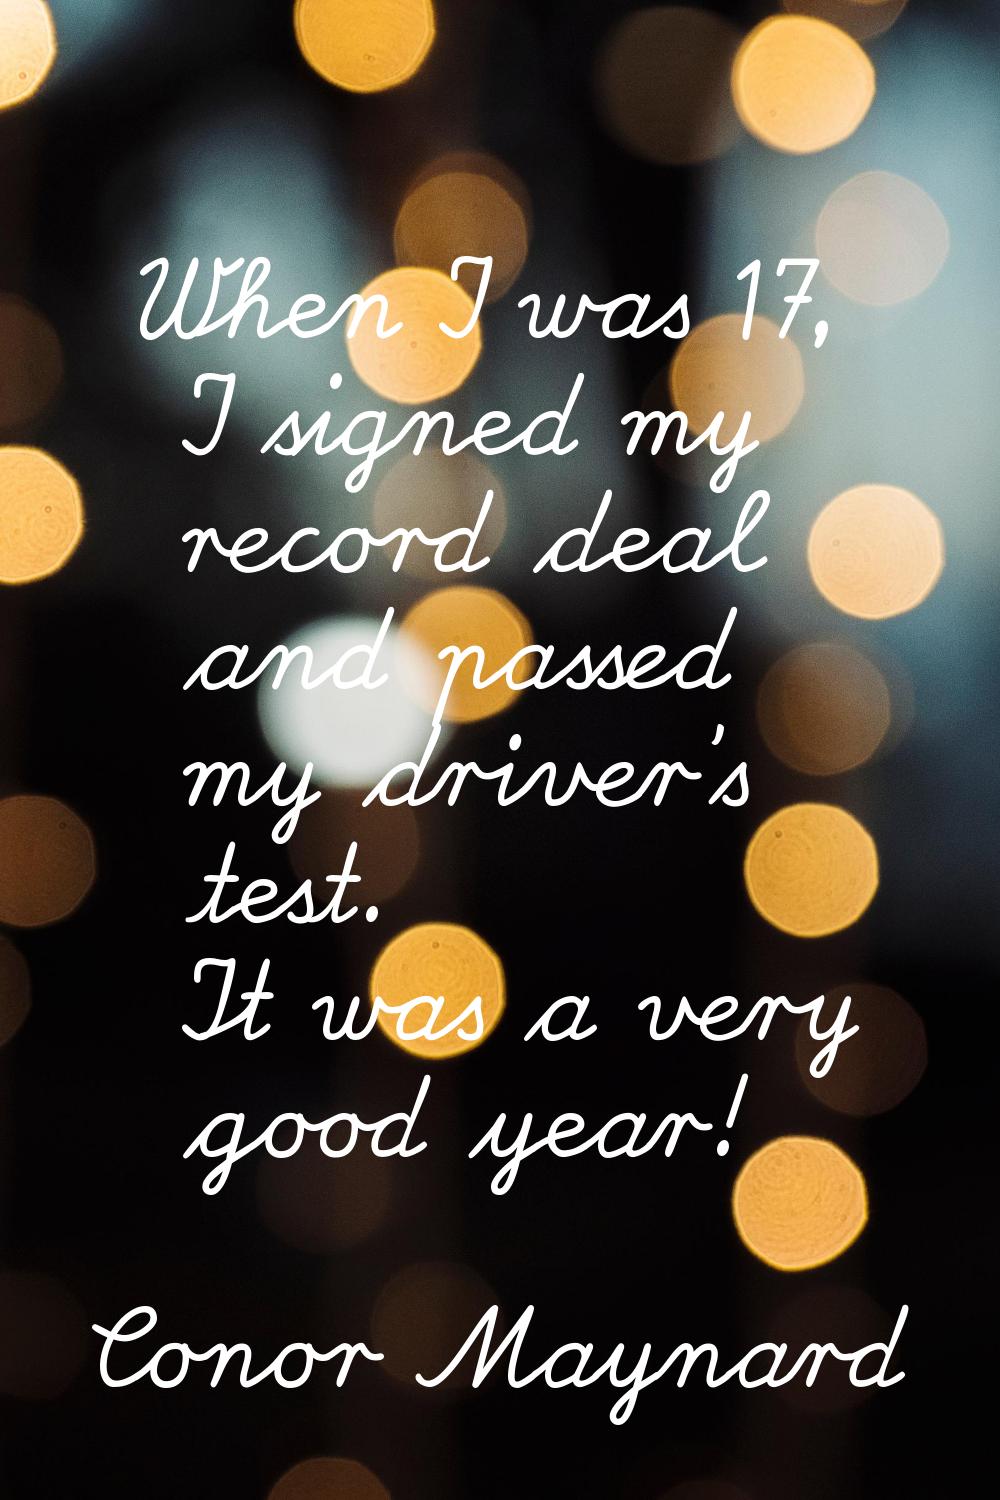 When I was 17, I signed my record deal and passed my driver's test. It was a very good year!